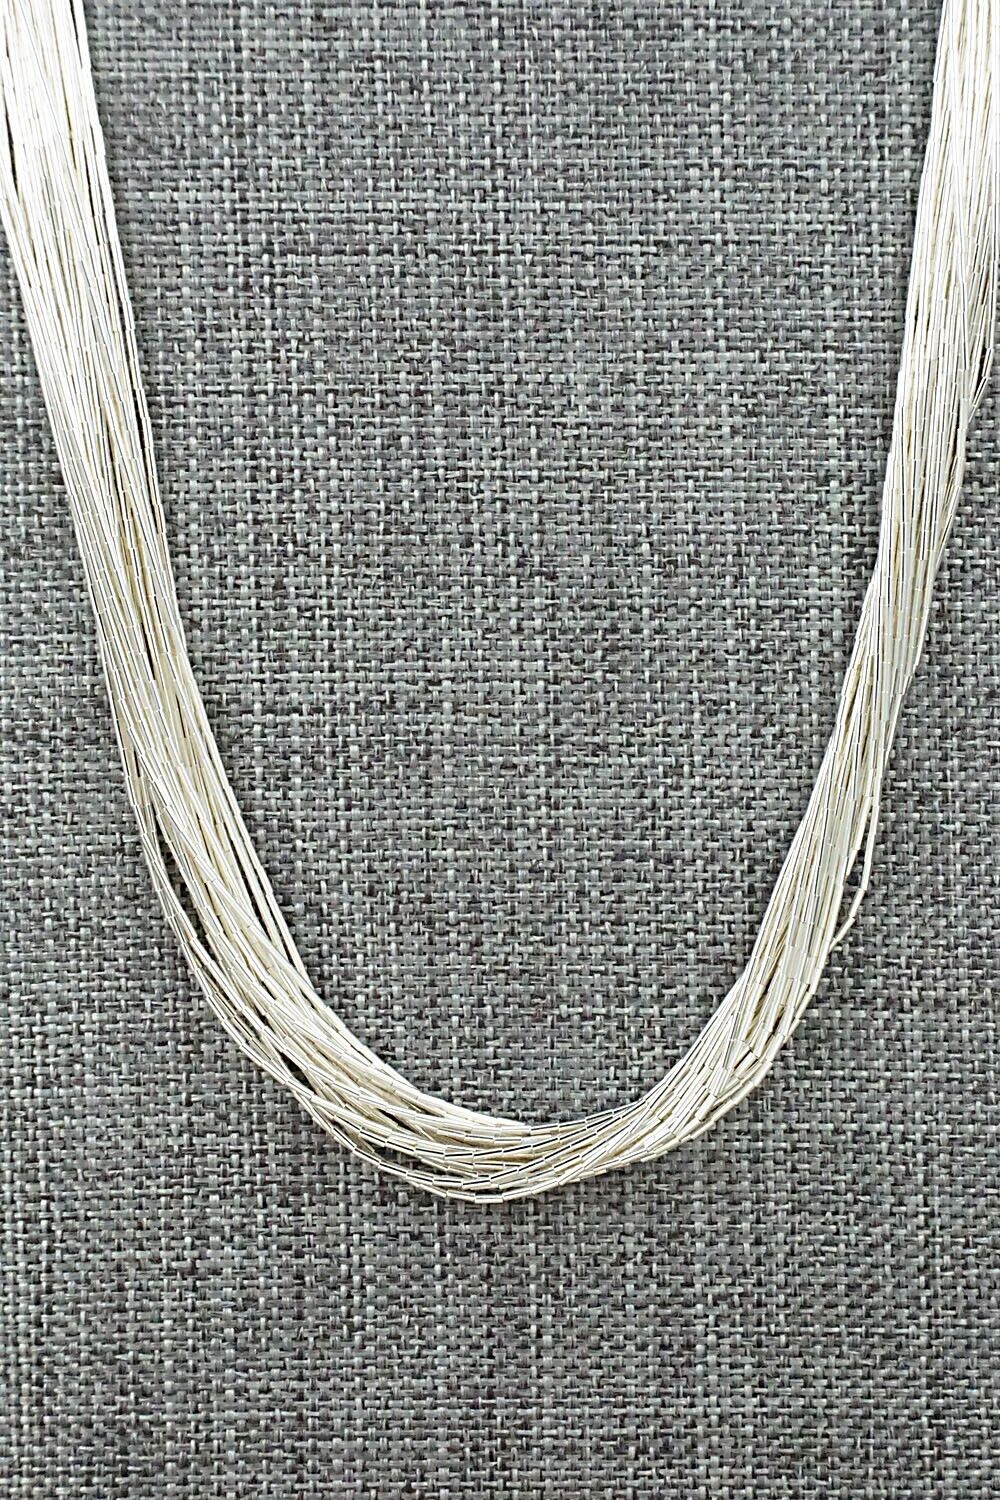 Liquid Silver Necklace - Sterling Silver 24"